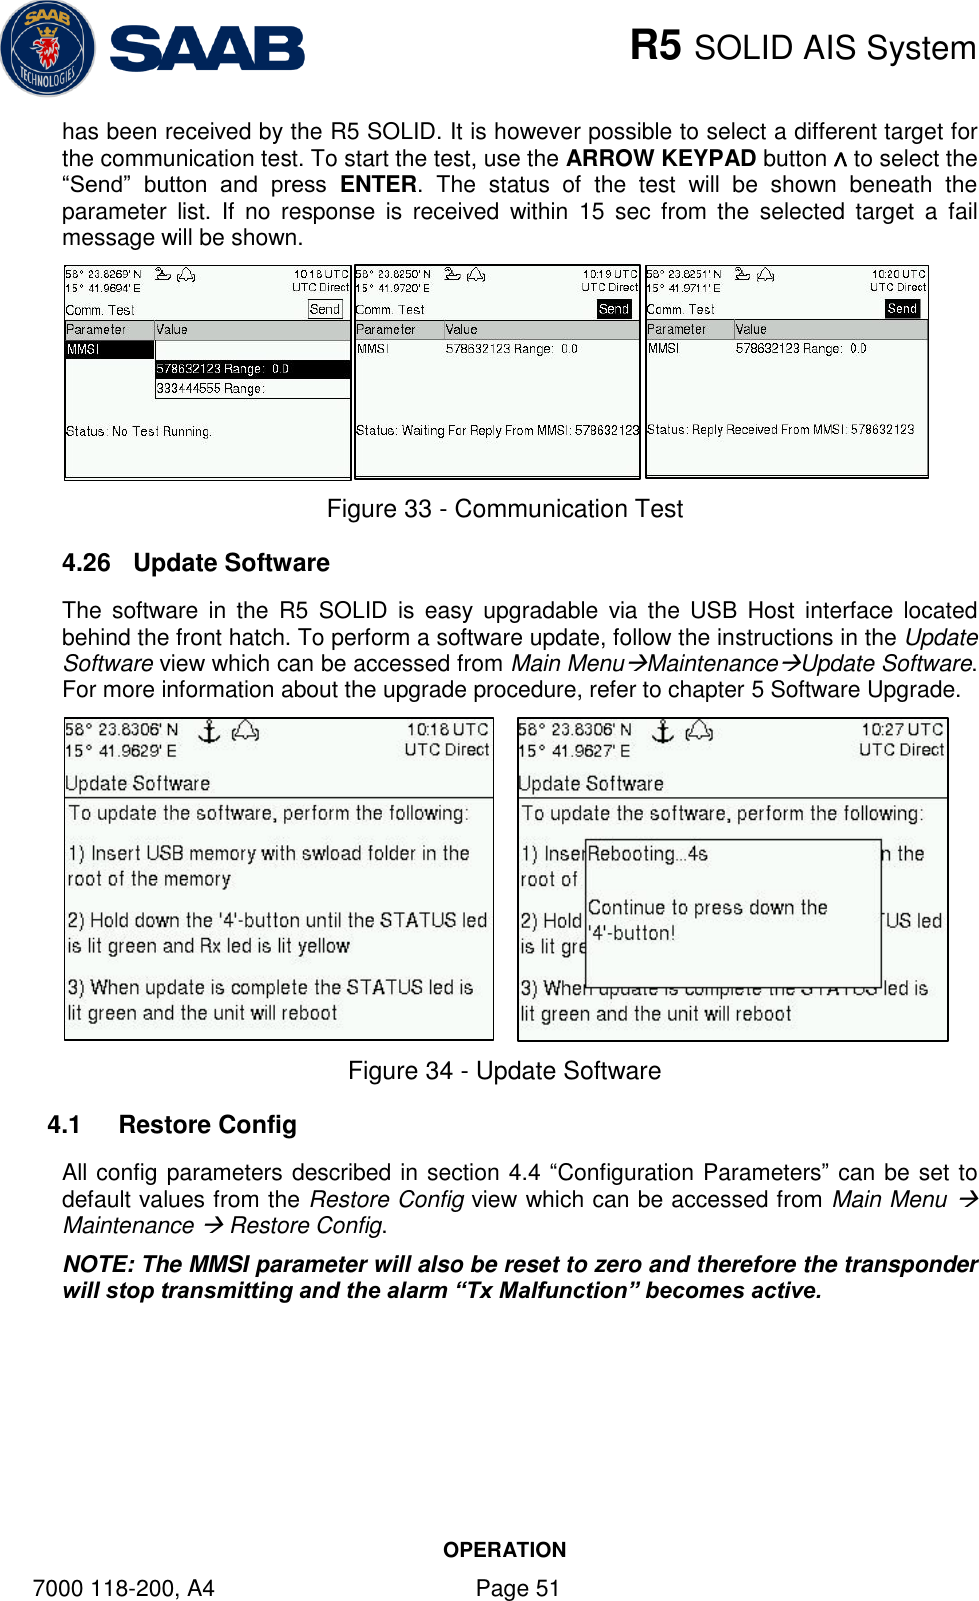    R5 SOLID AIS System OPERATION 7000 118-200, A4    Page 51 has been received by the R5 SOLID. It is however possible to select a different target for the communication test. To start the test, use the ARROW KEYPAD button ∧ to select the “Send”  button  and  press  ENTER.  The  status  of  the  test  will  be  shown  beneath  the parameter  list.  If  no  response  is  received  within  15  sec  from  the  selected  target  a  fail message will be shown.   Figure 33 - Communication Test 4.26  Update Software The  software  in  the  R5  SOLID  is  easy  upgradable  via the  USB  Host  interface  located behind the front hatch. To perform a software update, follow the instructions in the Update Software view which can be accessed from Main MenuMaintenanceUpdate Software. For more information about the upgrade procedure, refer to chapter 5 Software Upgrade.       Figure 34 - Update Software 4.1  Restore Config All config parameters described in section 4.4 “Configuration Parameters” can be set to default values from the Restore Config view which can be accessed from Main Menu  Maintenance  Restore Config.  NOTE: The MMSI parameter will also be reset to zero and therefore the transponder will stop transmitting and the alarm “Tx Malfunction” becomes active.  